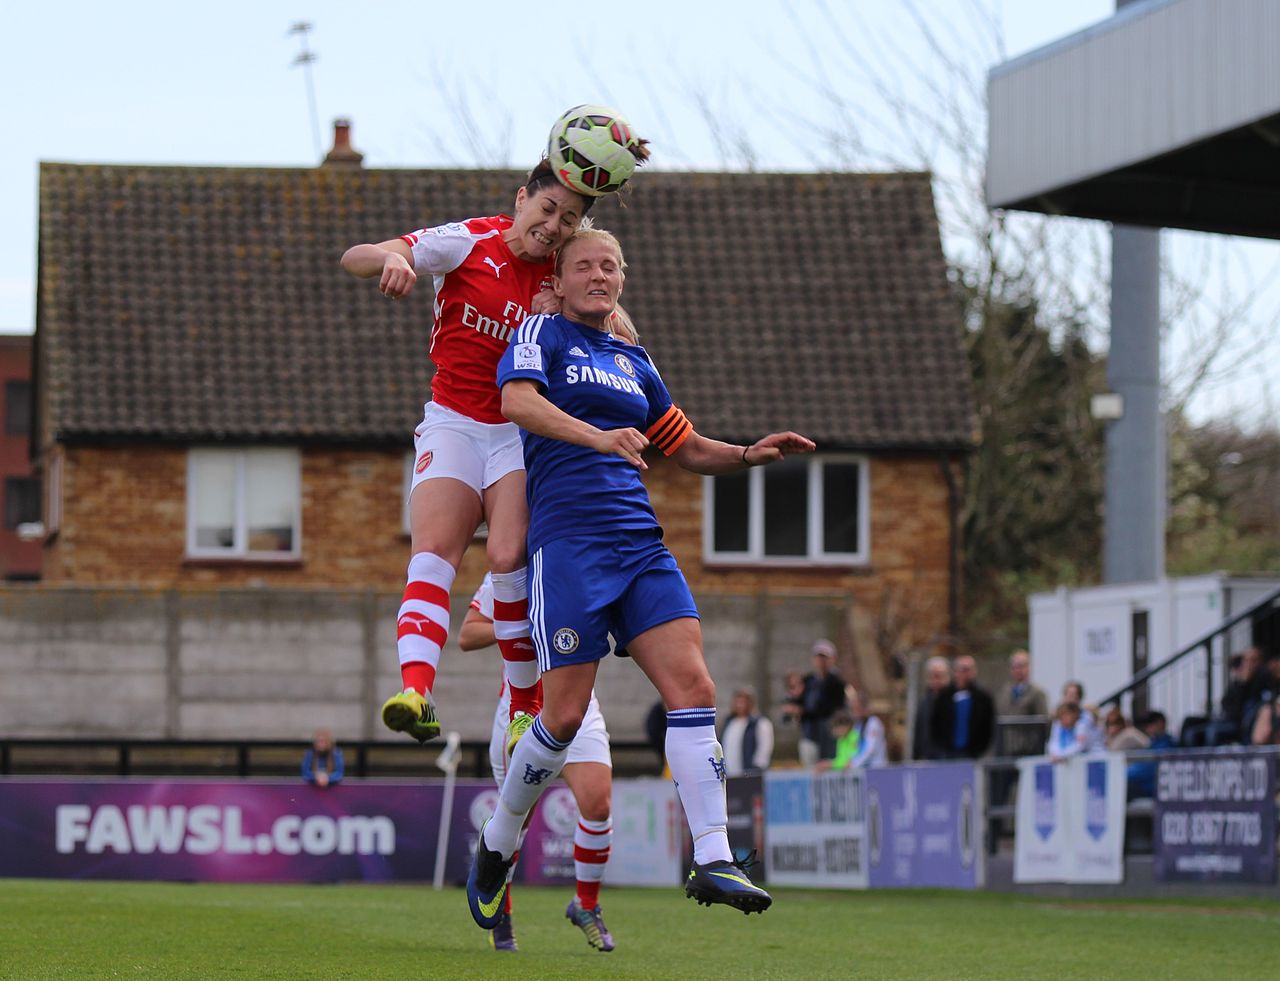 Photo Credit: Joshjdss
By joshjdss - Arsenal Ladies Vs Chelsea, CC BY 2.0, https://commons.wikimedia.org/w/index.php?curid=39600324